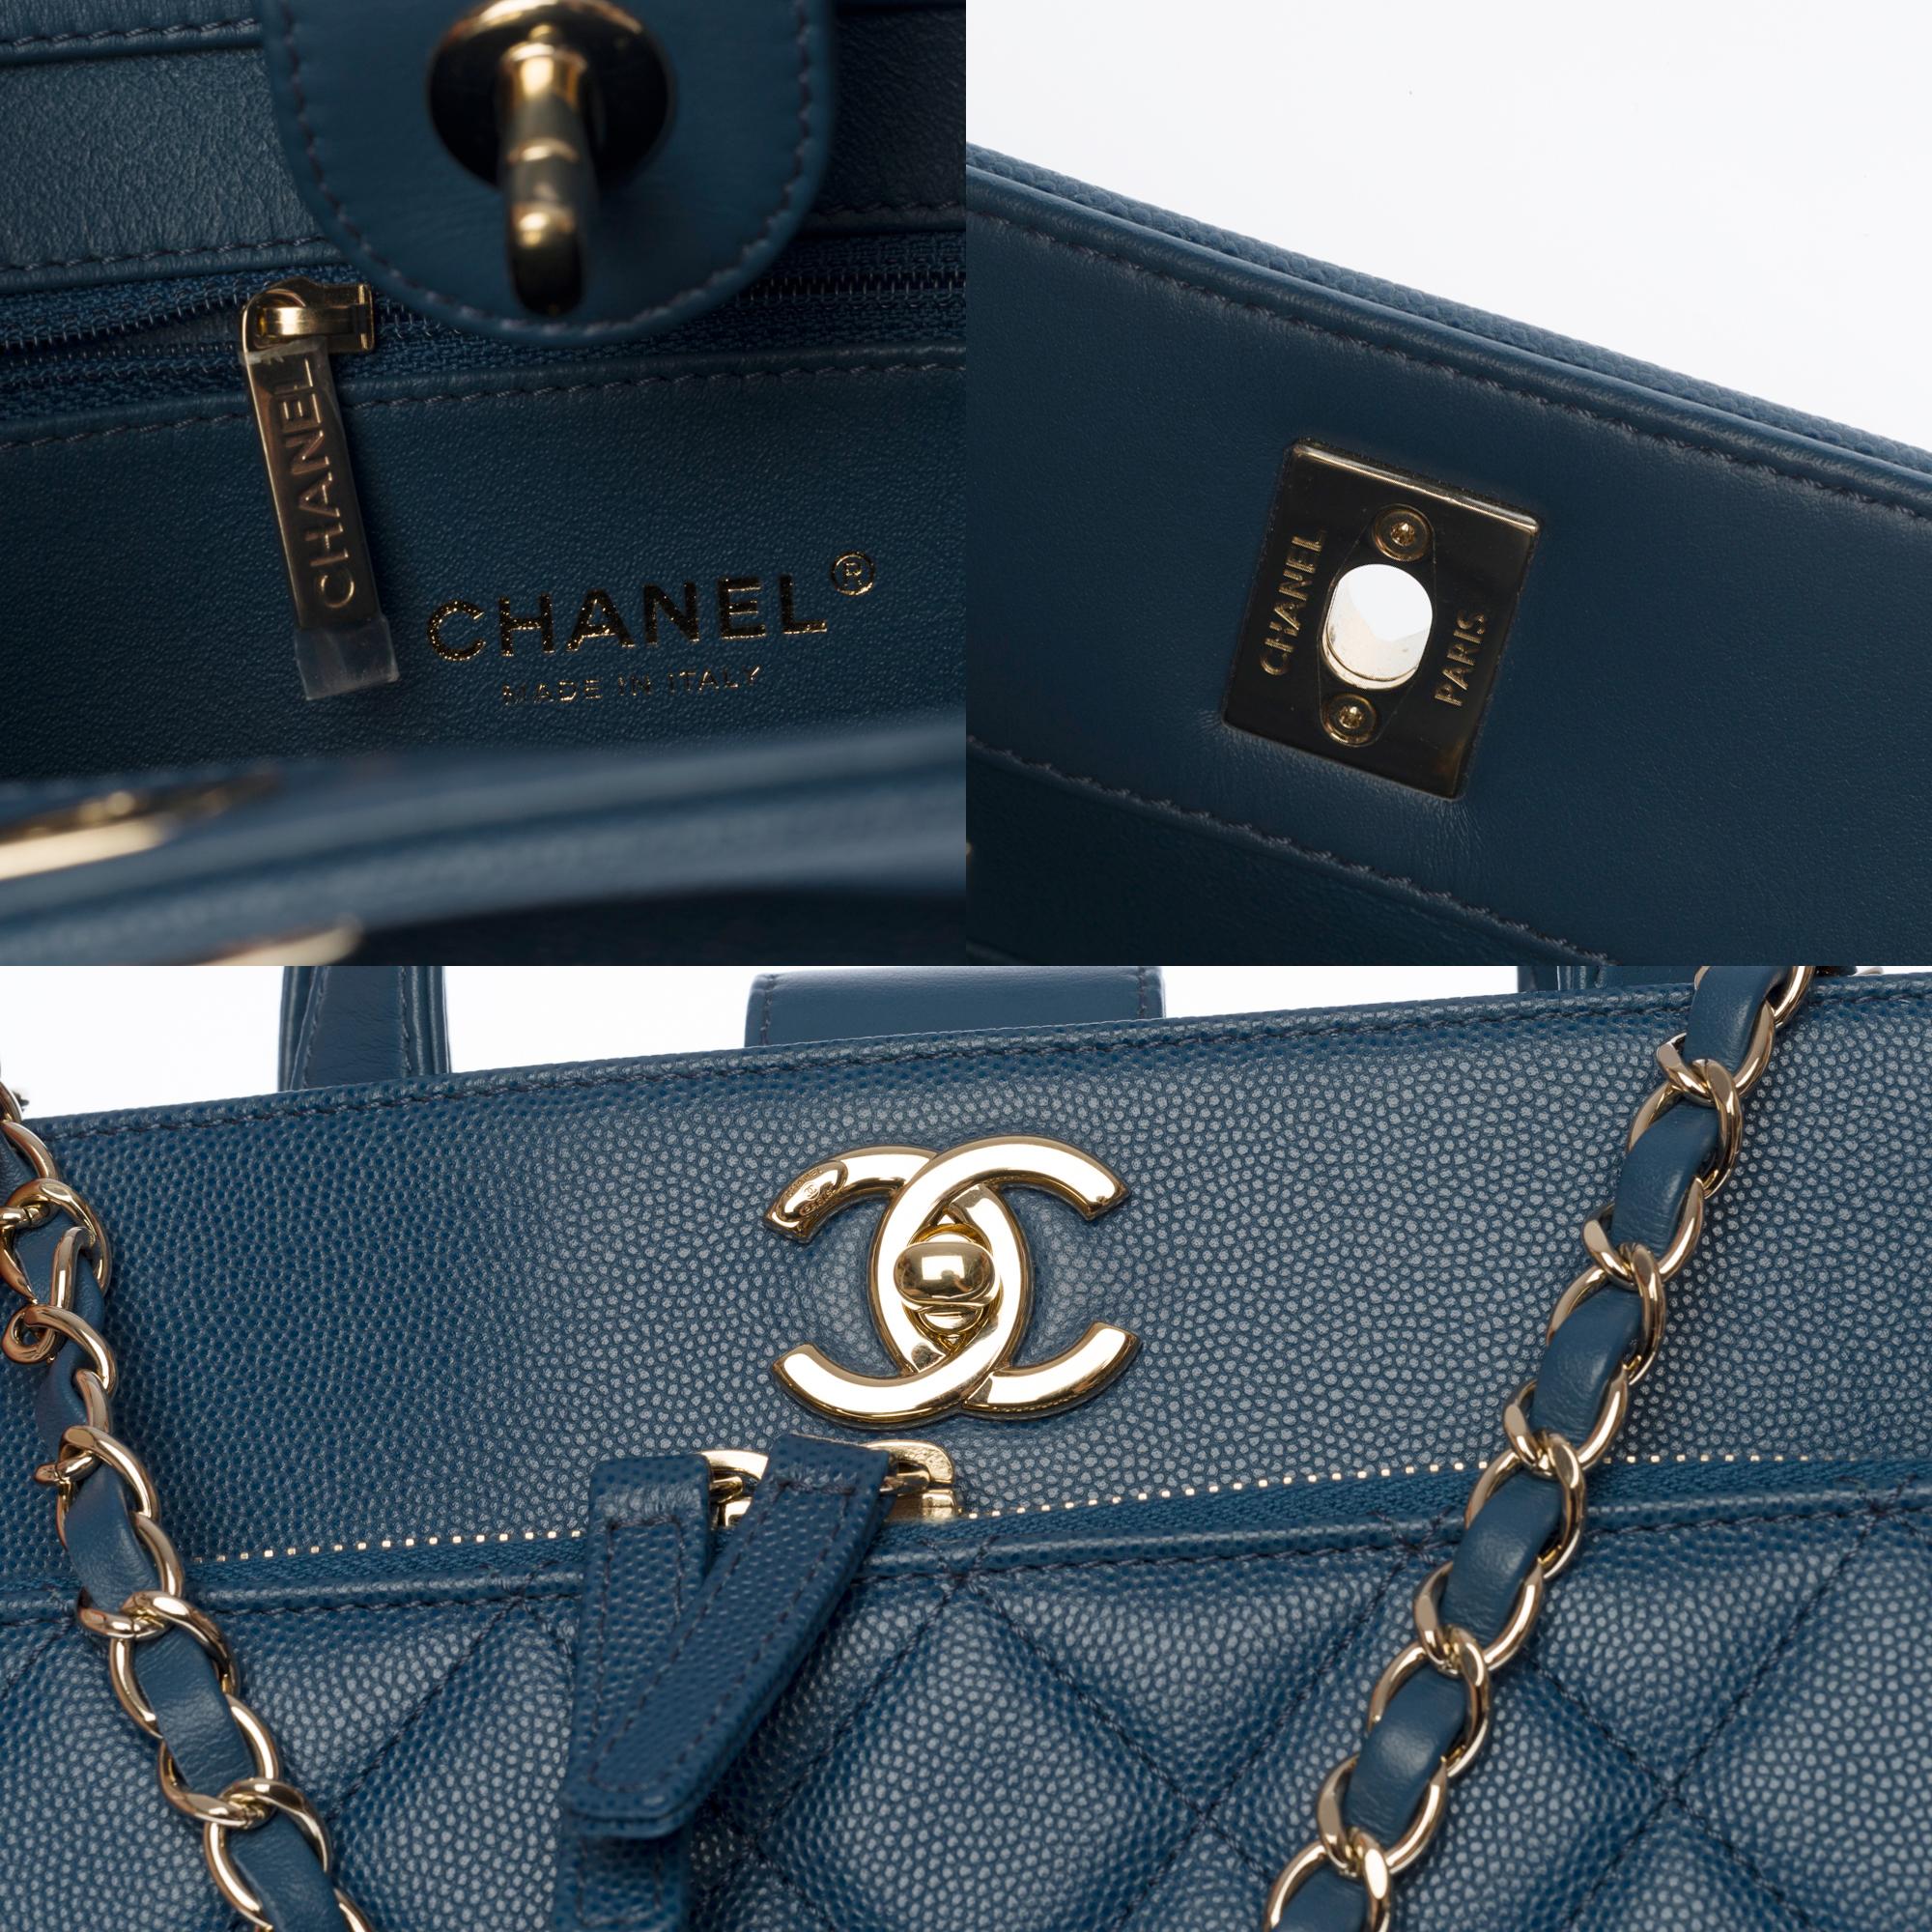 Blue Chanel Business Affinity Tote bag in blue caviar quilted leather, GHW